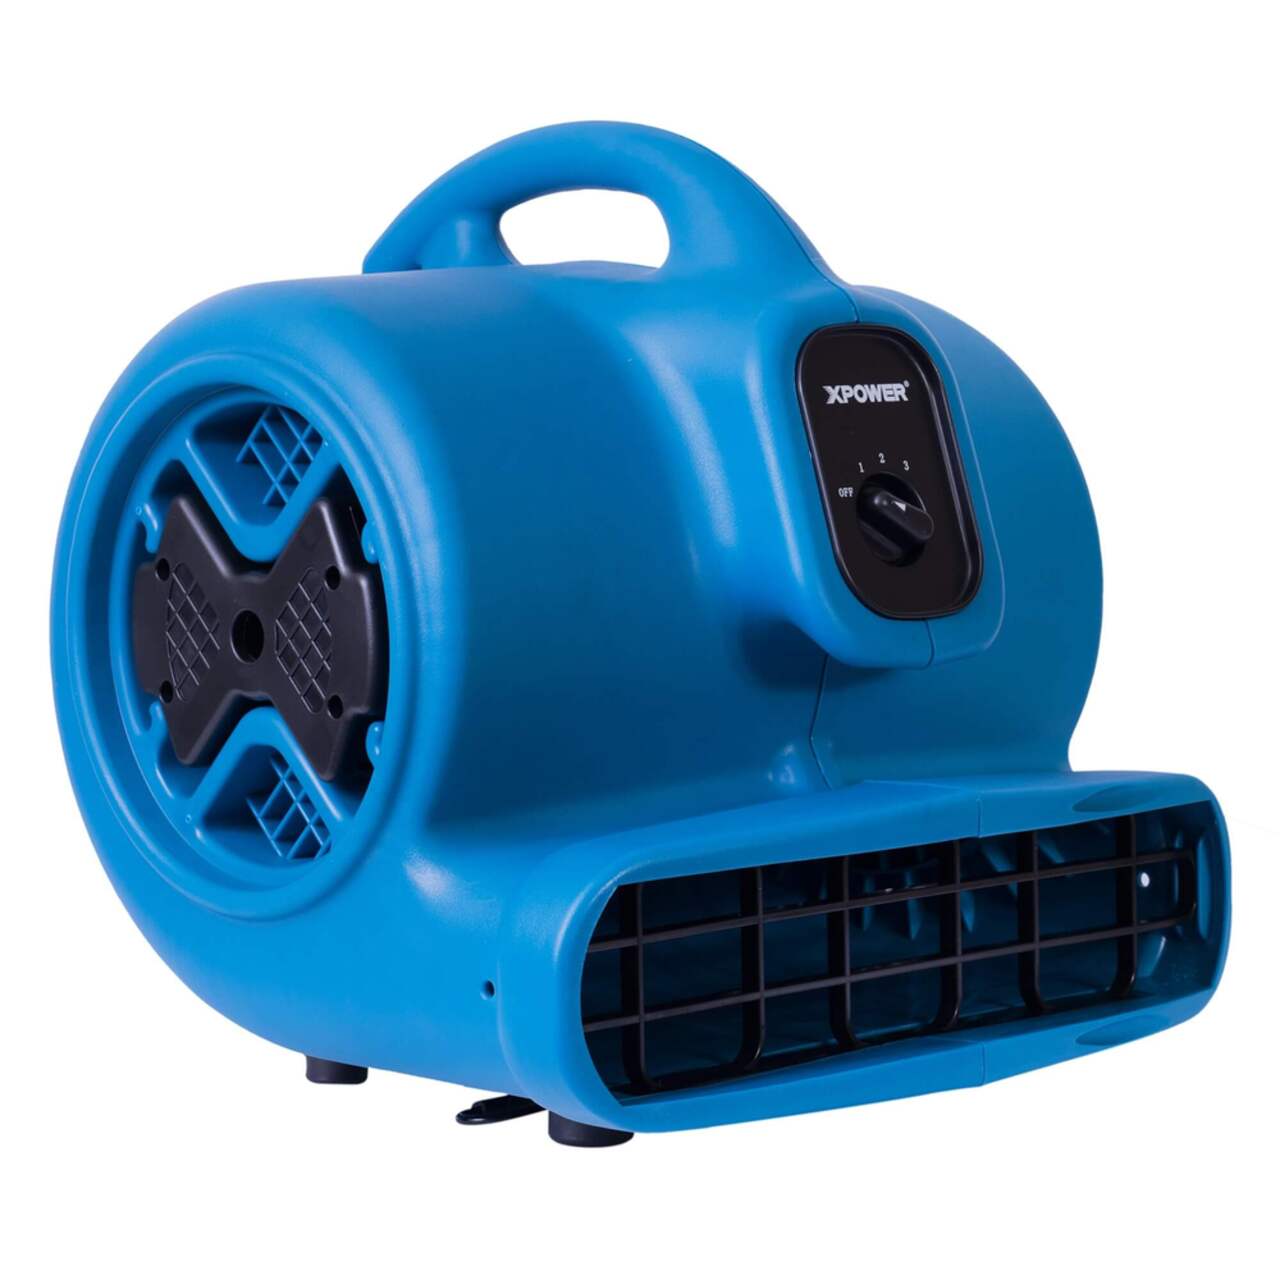 https://media-www.canadiantire.ca/product/fixing/home-environment/summer-climate-control/0437035/xpower-2800-cfm-air-mover-carpet-dryer-floor-fan-blower-35eb2ee9-ca70-475d-bb8e-ce27aac0b200.png?imdensity=1&imwidth=640&impolicy=mZoom